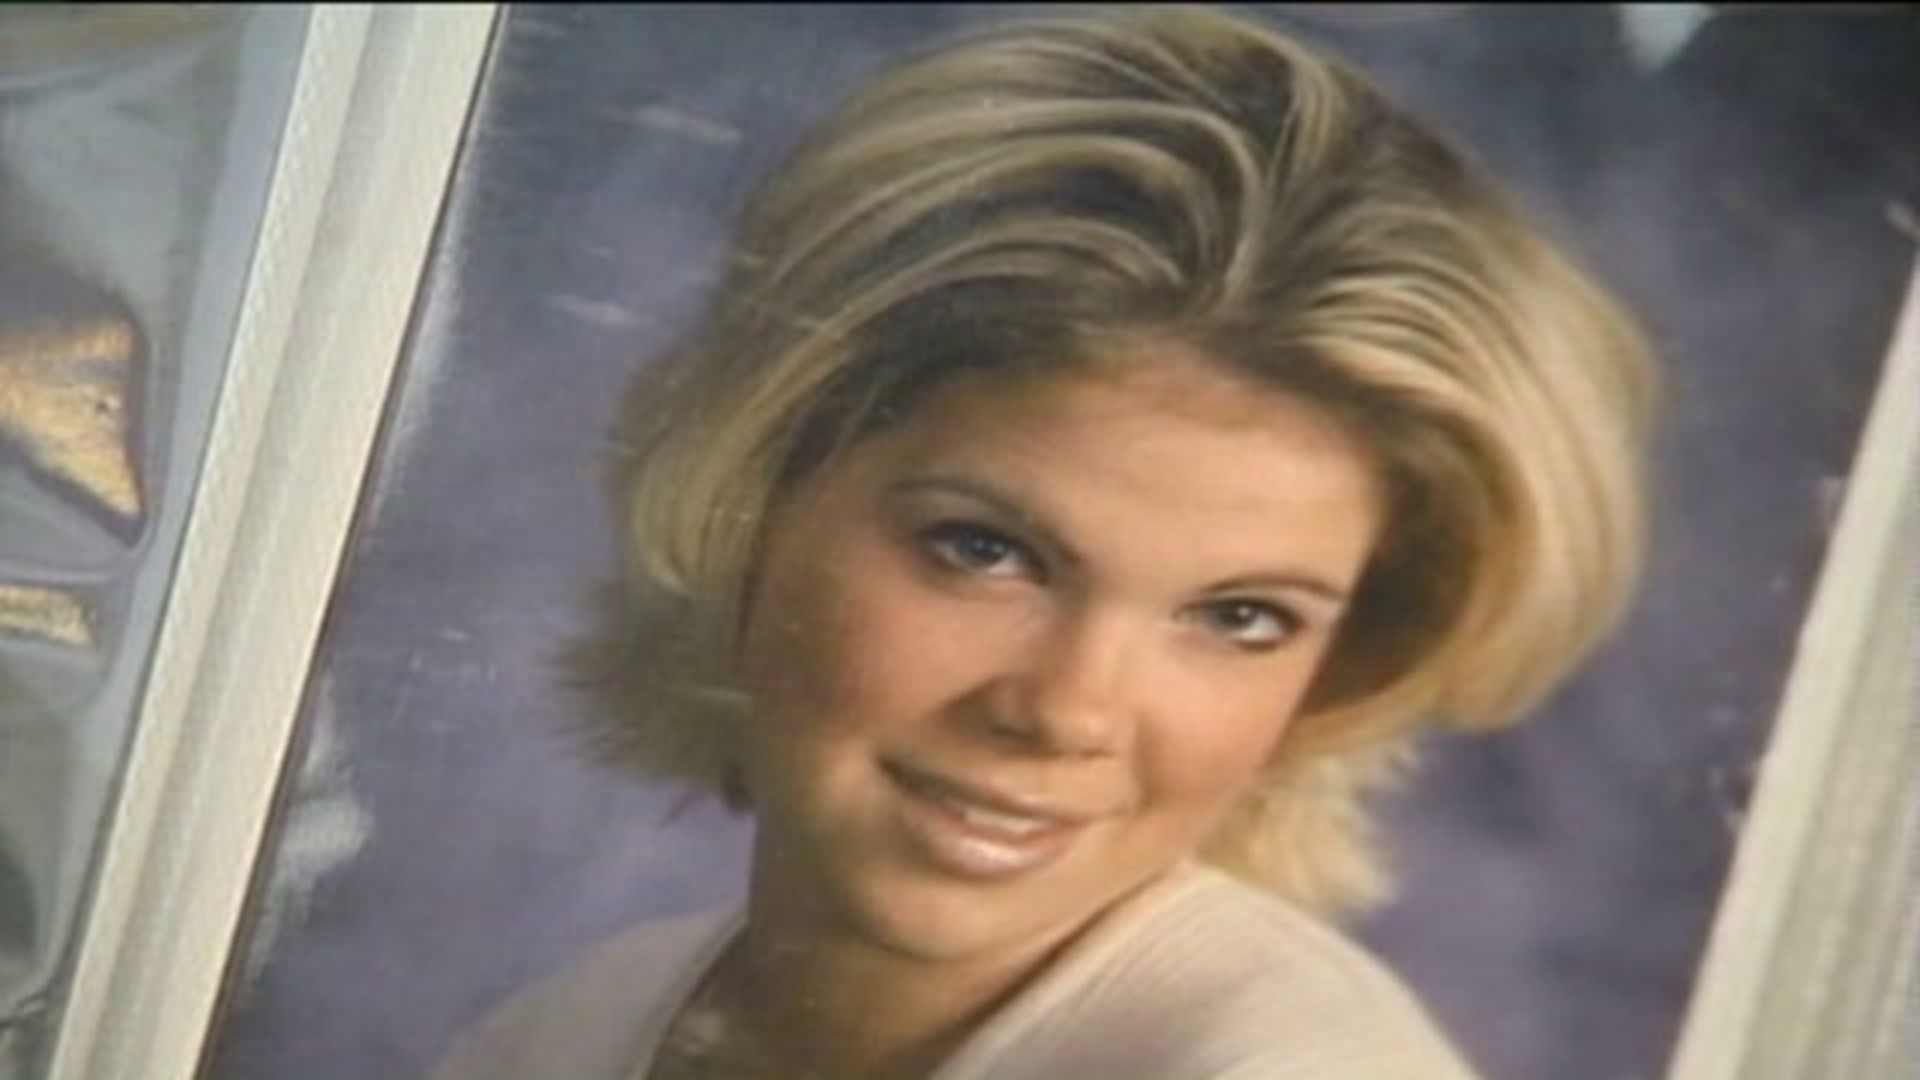 Scranton Native Can "Rest In Peace" After Guilty Verdict